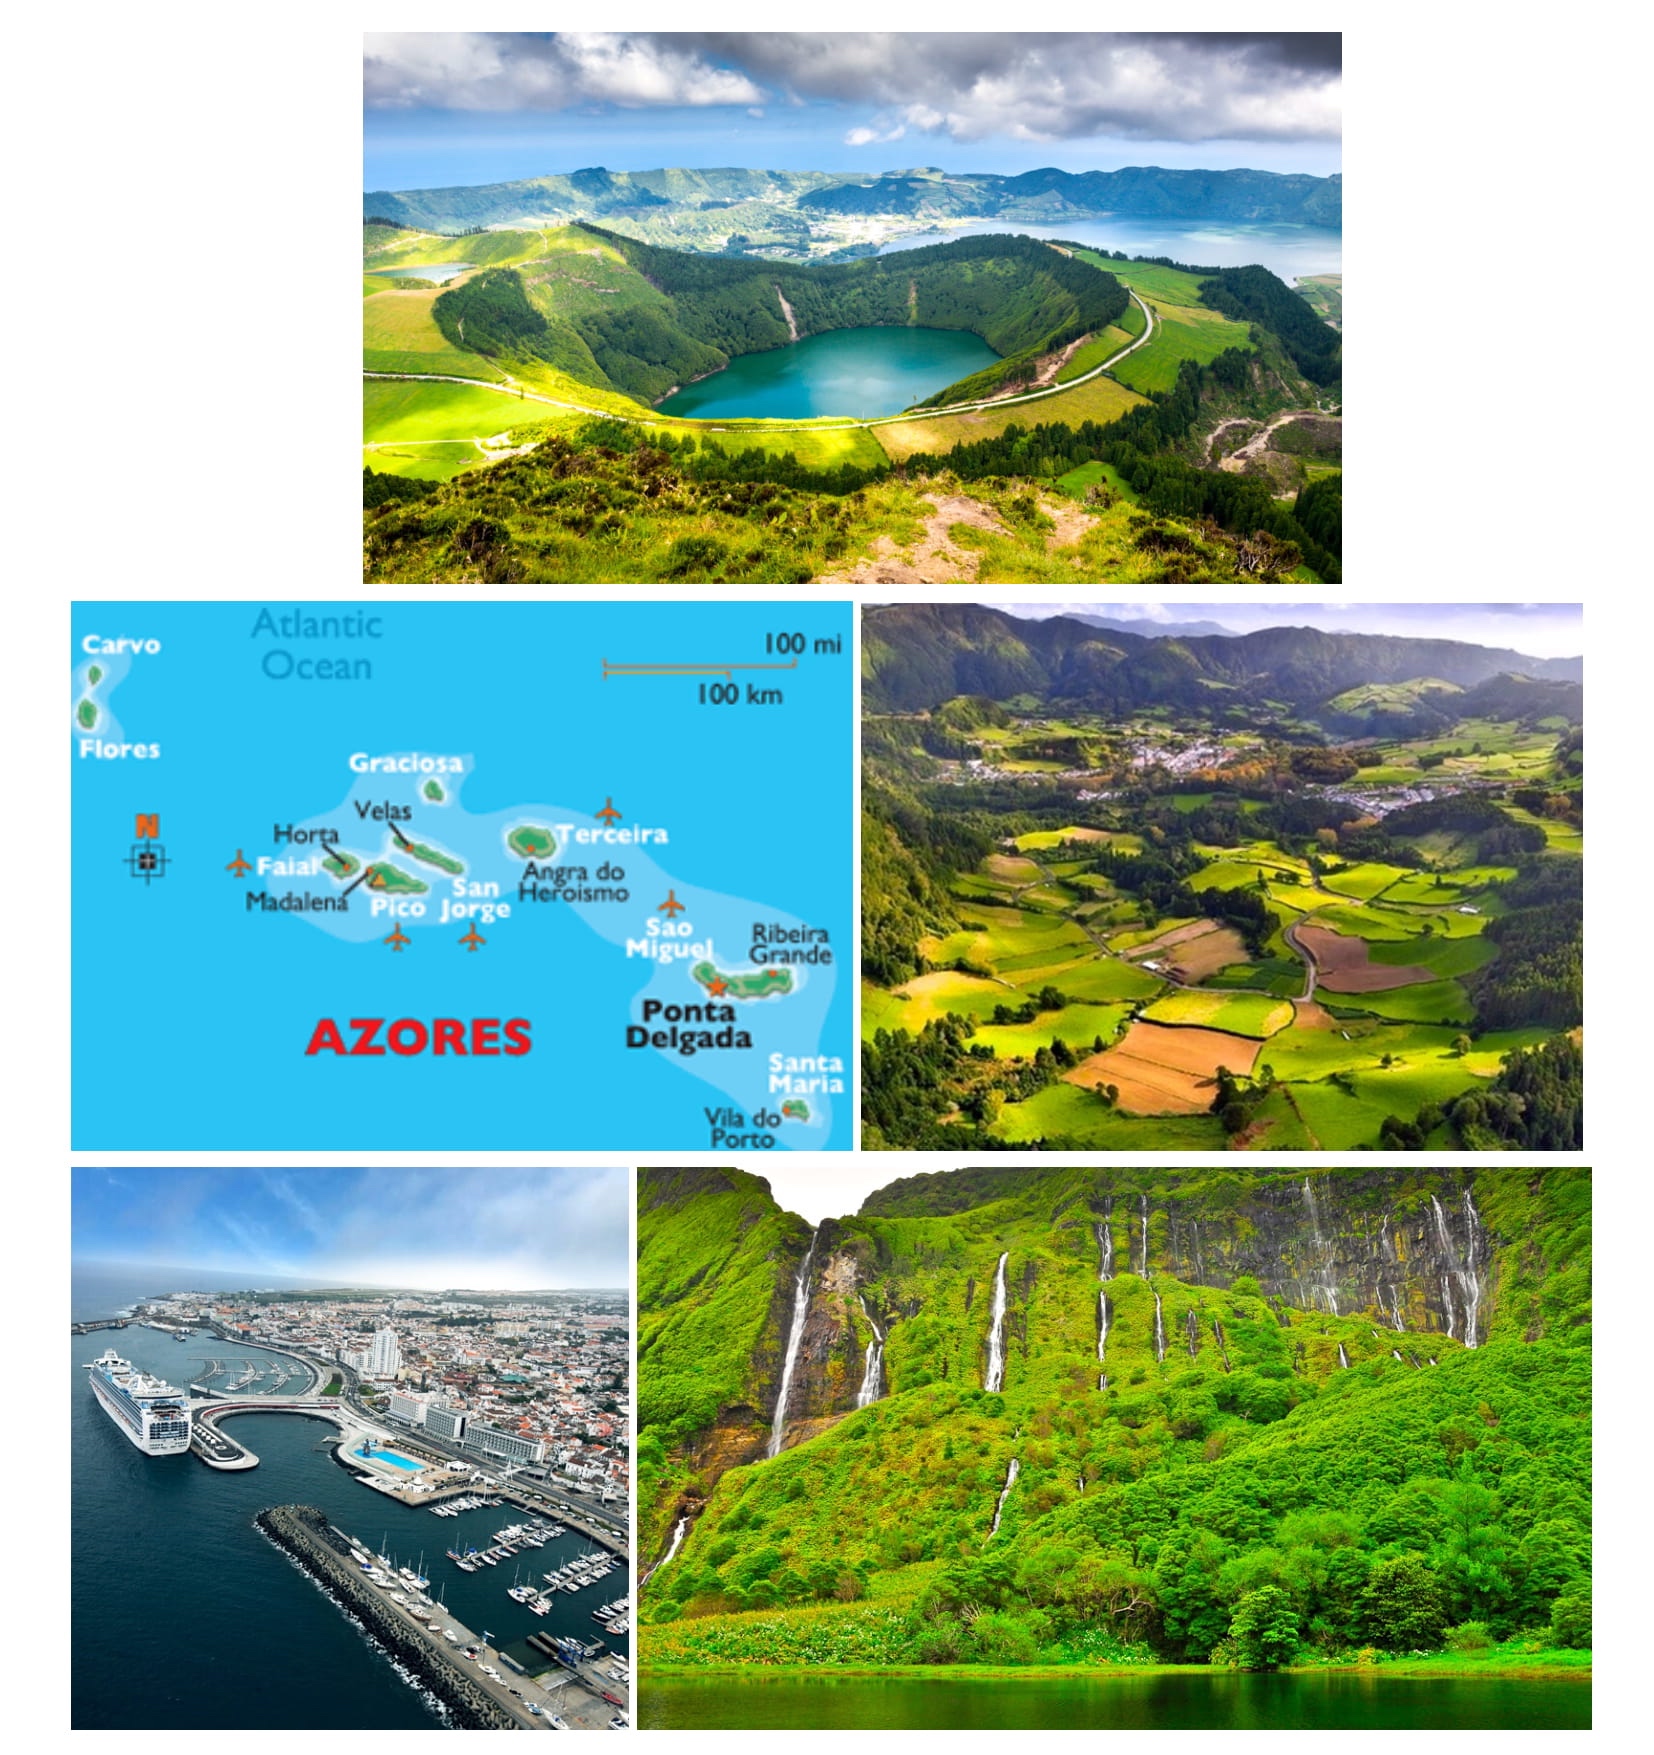 Azores Picture Page-1.jpg